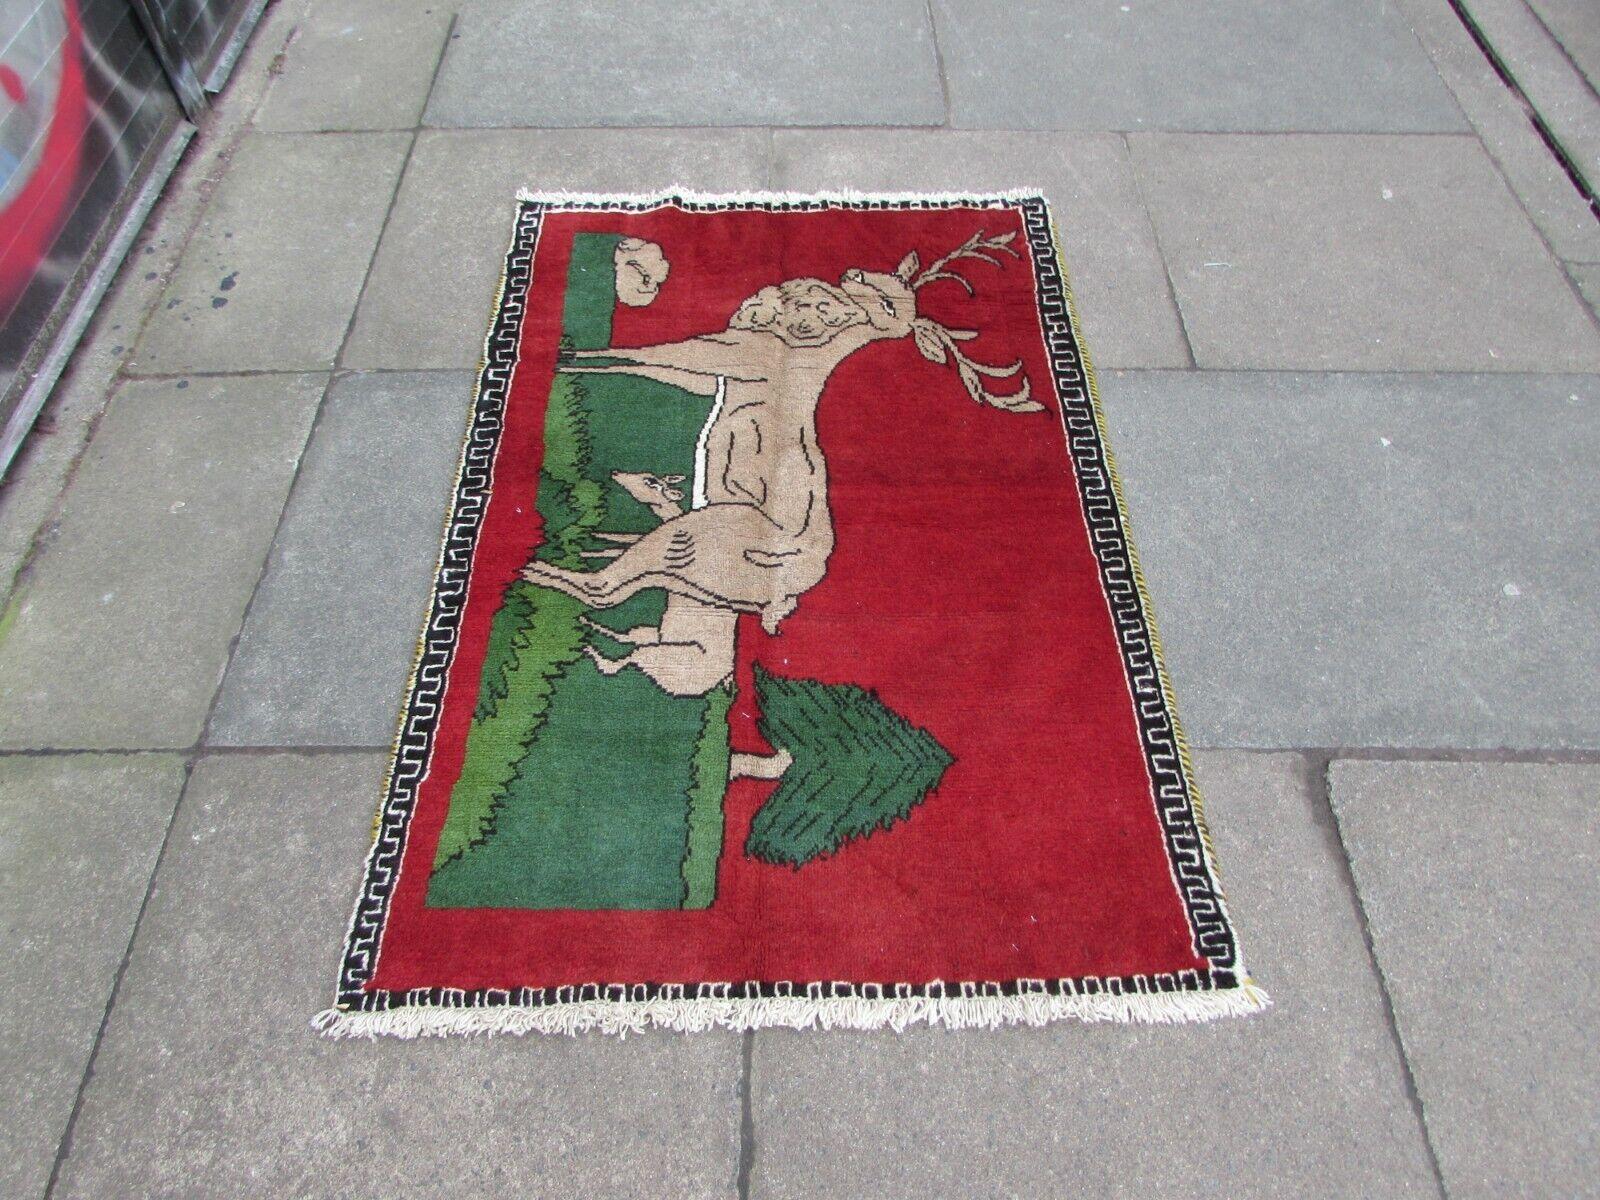 Handmade Vintage Persian Style Gabbeh Rug With Deer 2.6' x 4', 1970s - 1Q71 For Sale 1